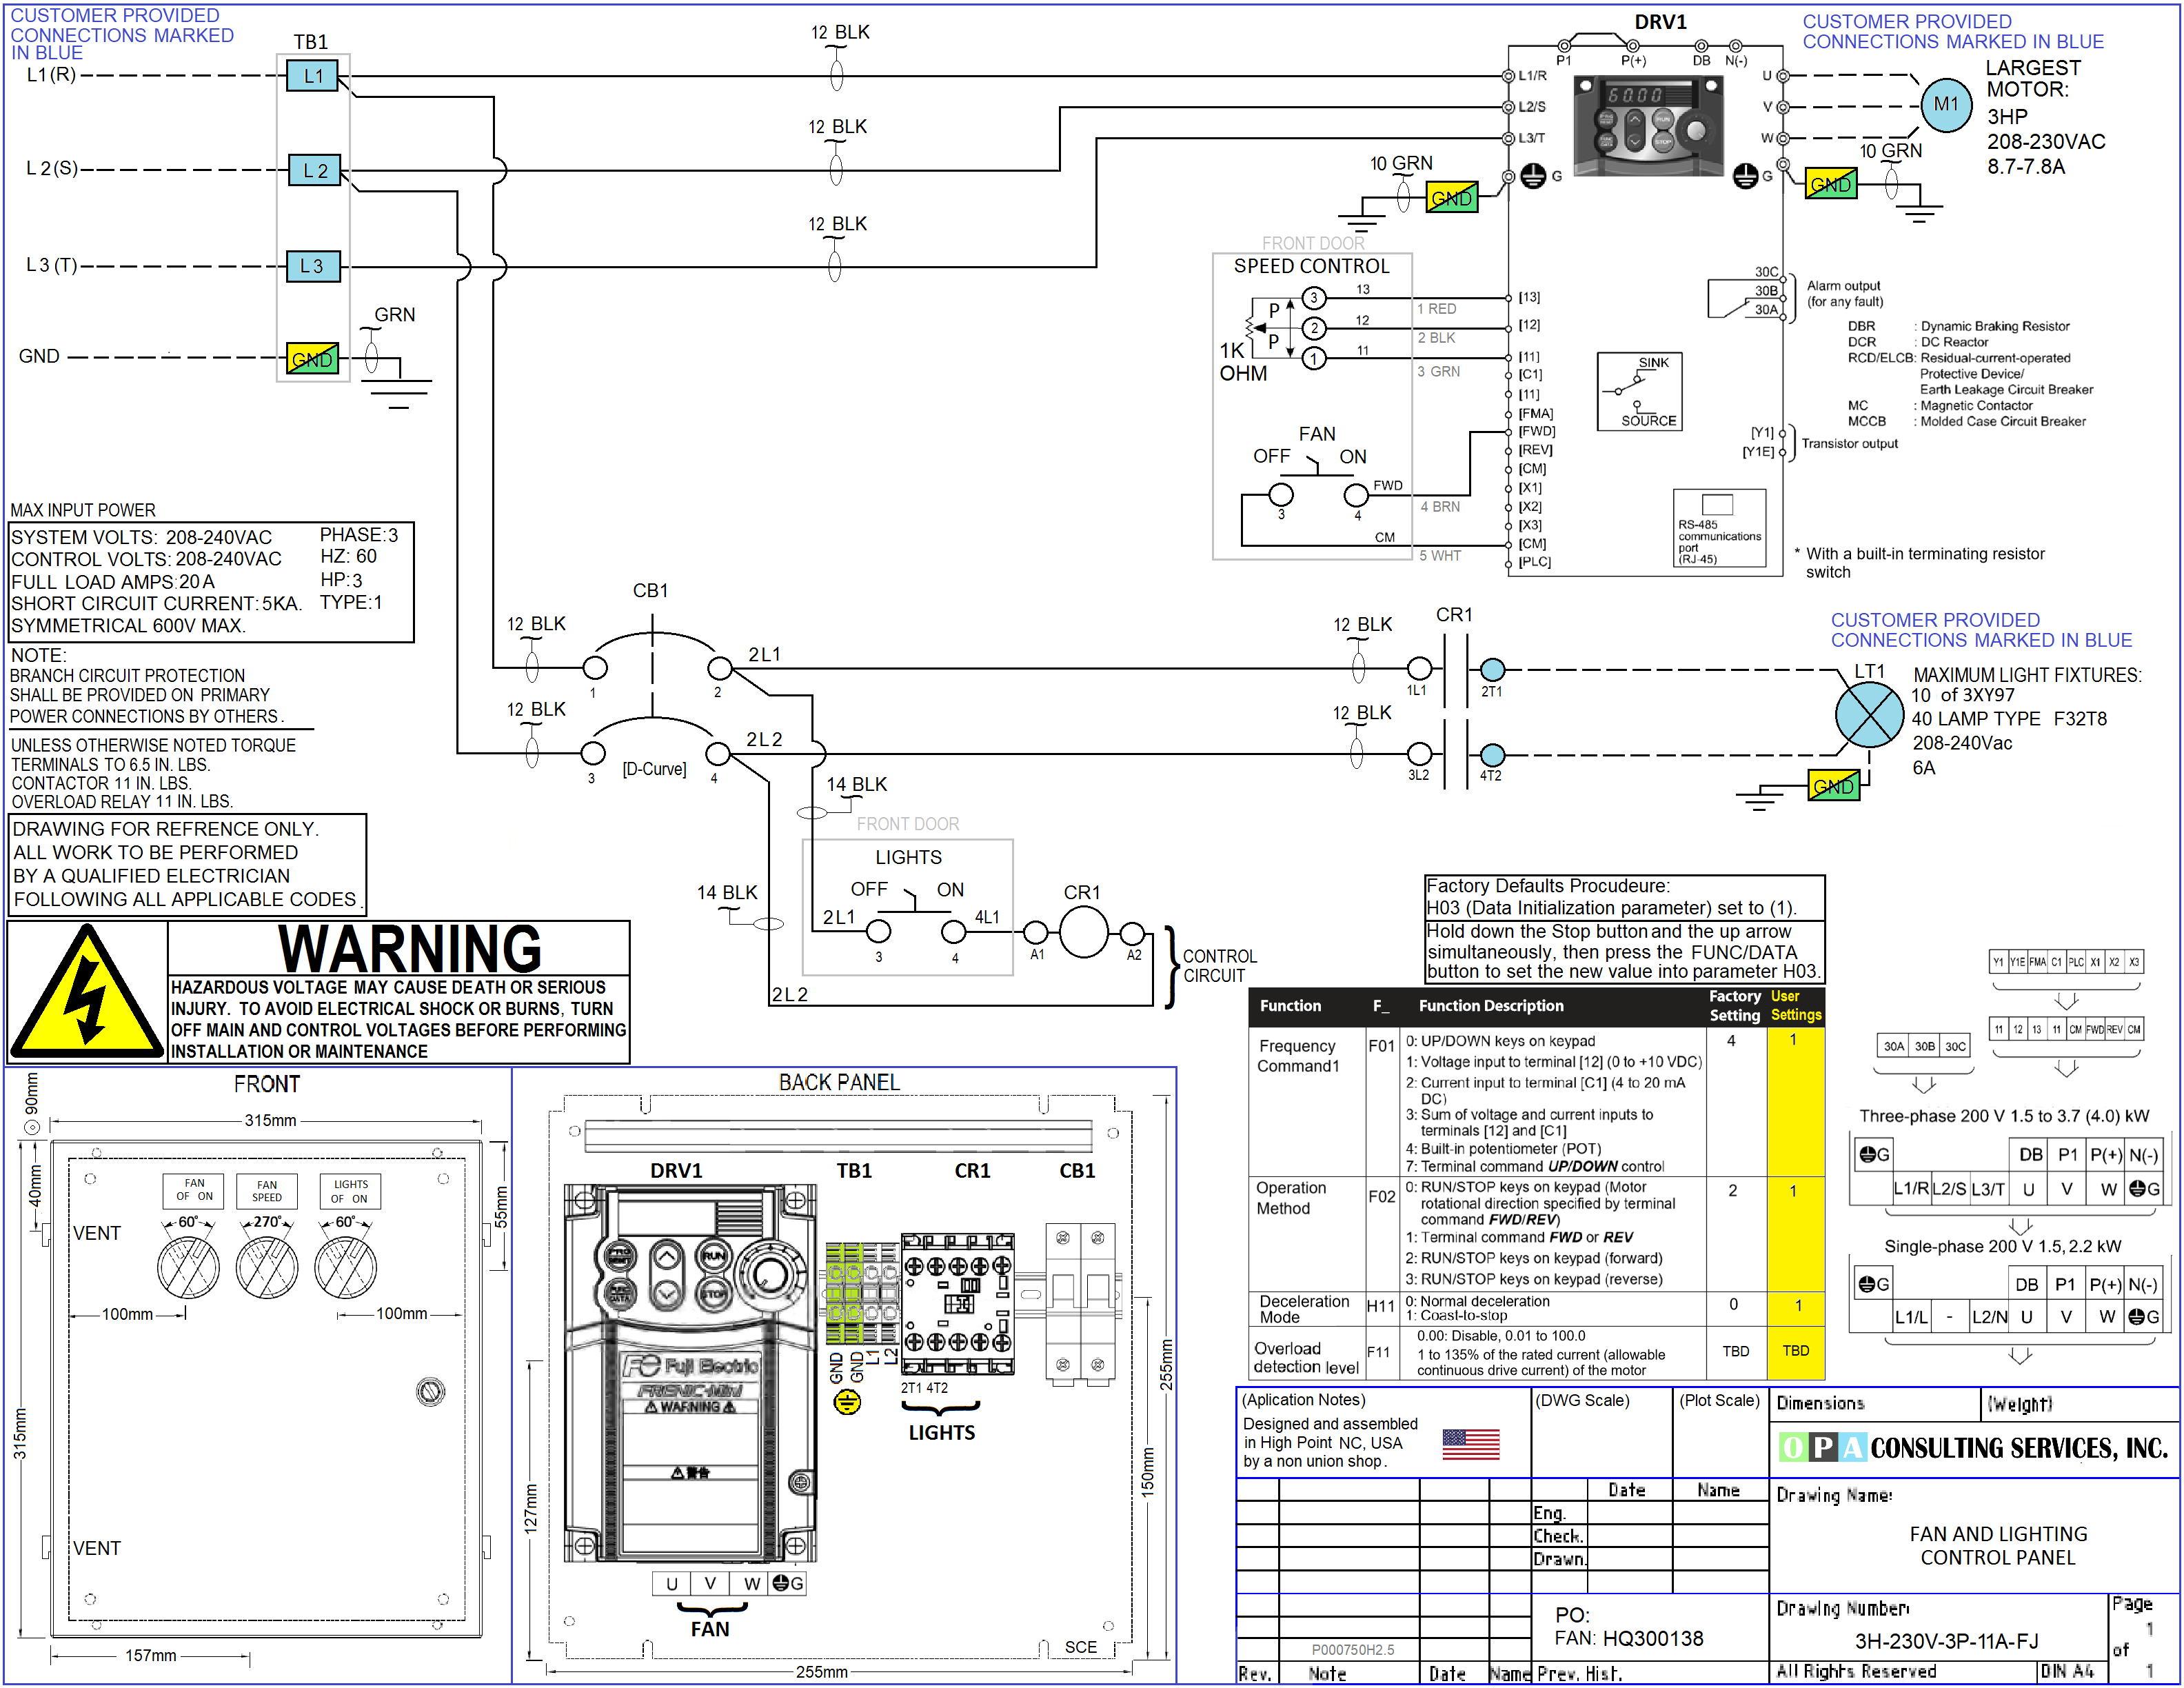 Paint Booth VFD Control Panel Drawing ... Free to Download